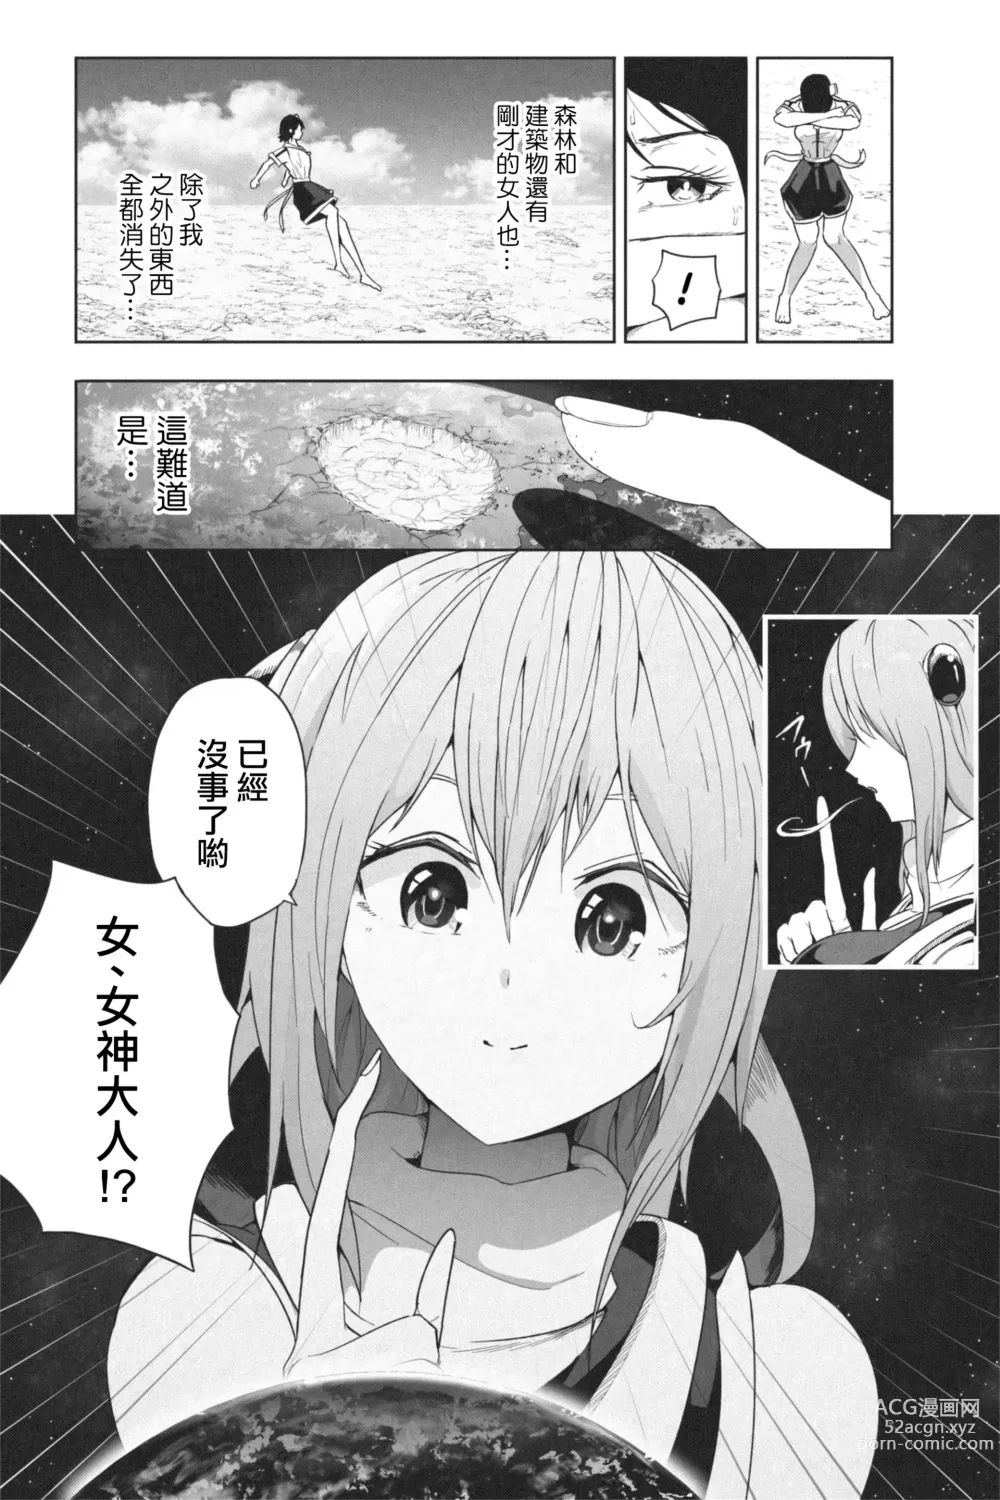 Page 7 of doujinshi NEW Chikyuu de Asobo - NEW Play with earth